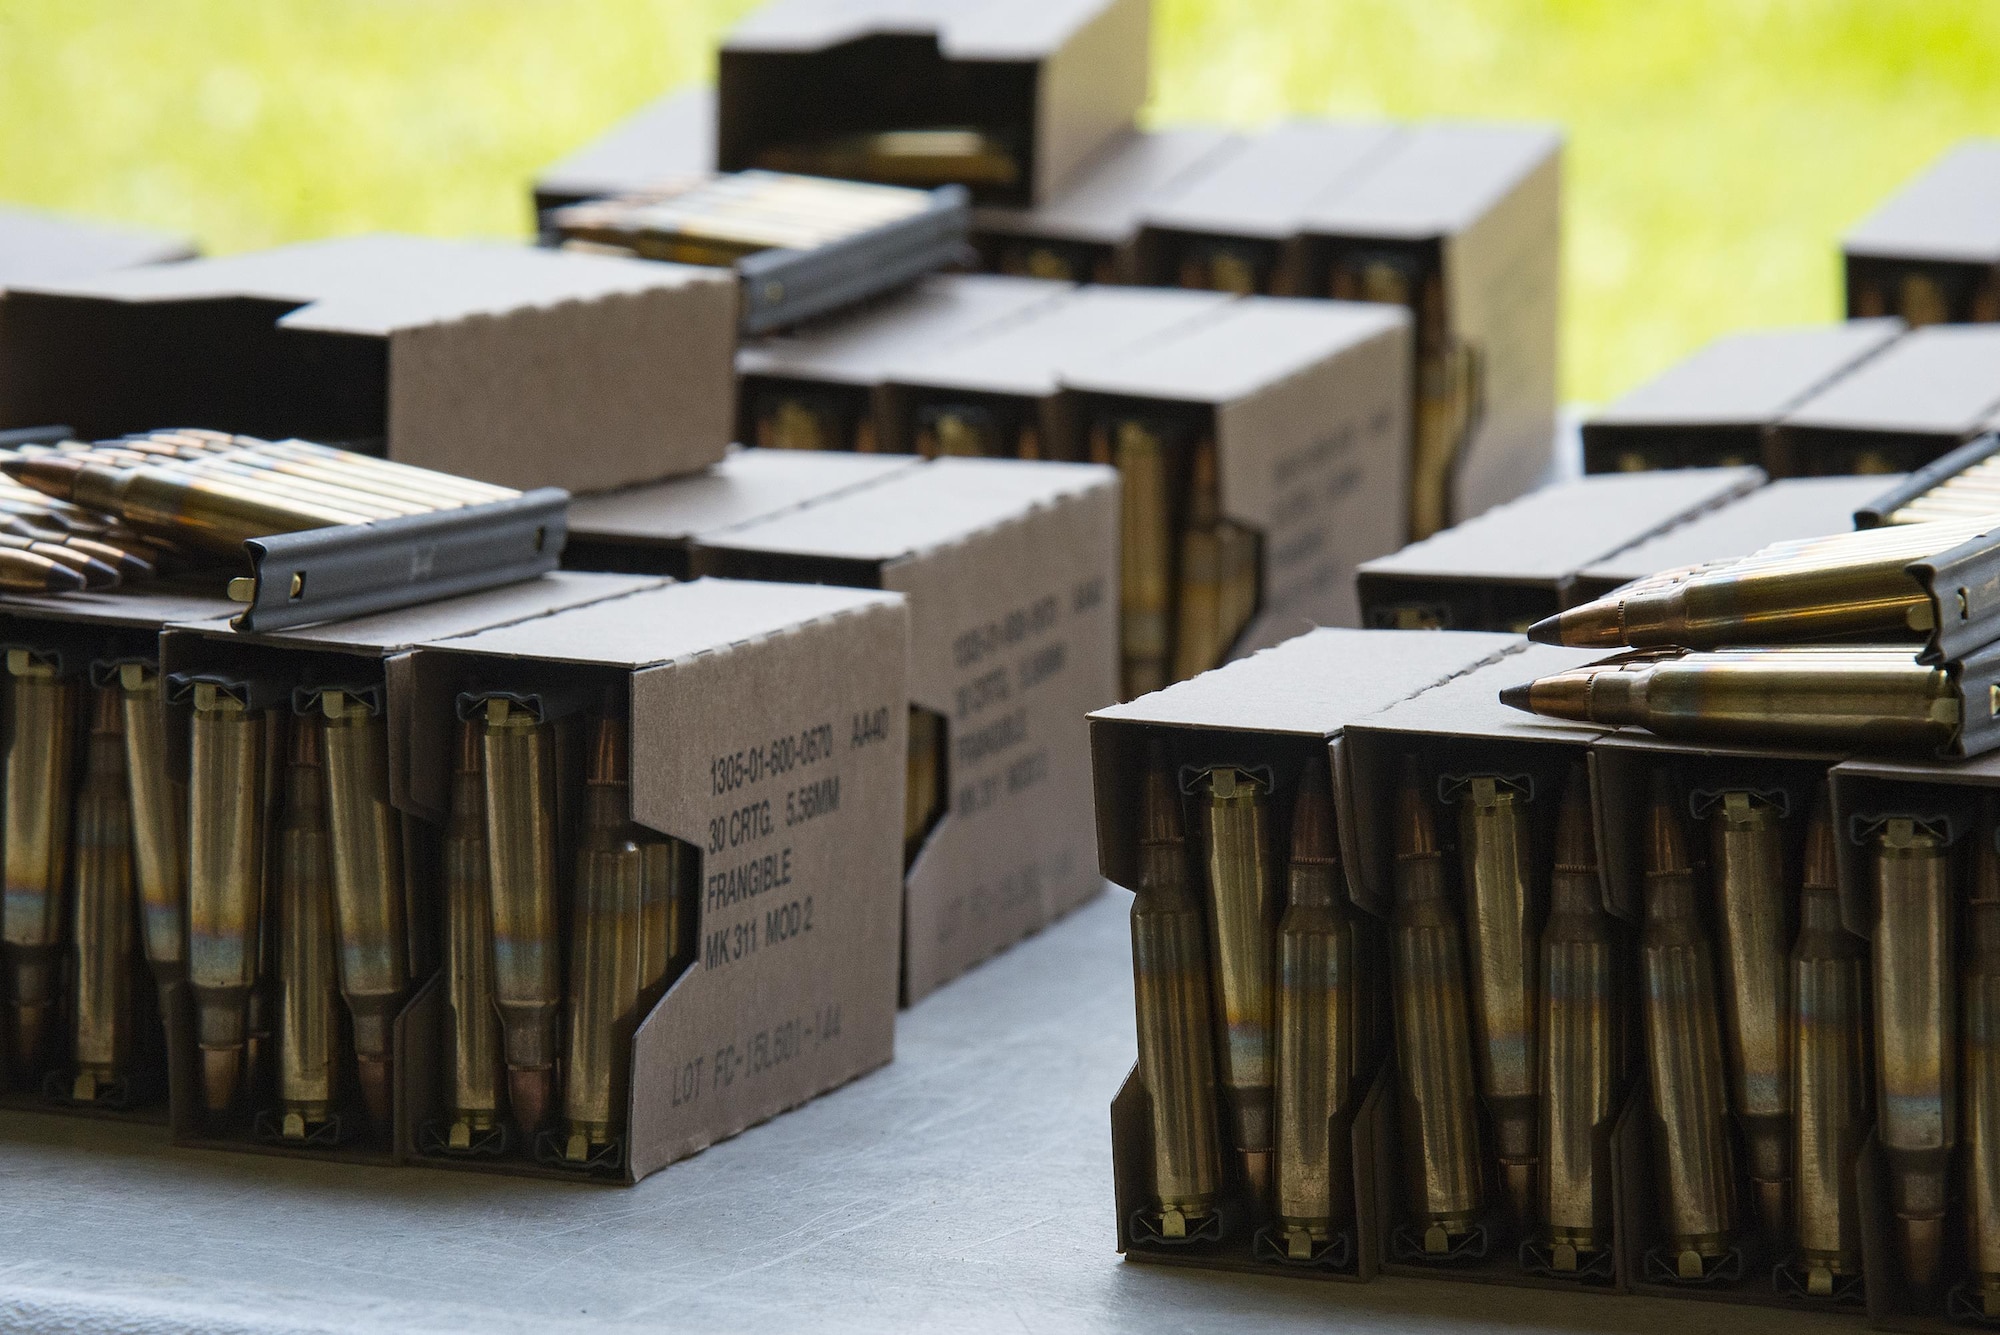 Ammunition rests on a table at the Combat Arms Training and Maintenance range, July 25, 2017, at Moody Air Force Base, Ga. During CATM, Airmen must demonstrate quality safety standards while handling and shooting their weapons in order to qualify to deploy. (U.S. Air Force photo by Airman 1st Class Erick Requadt)